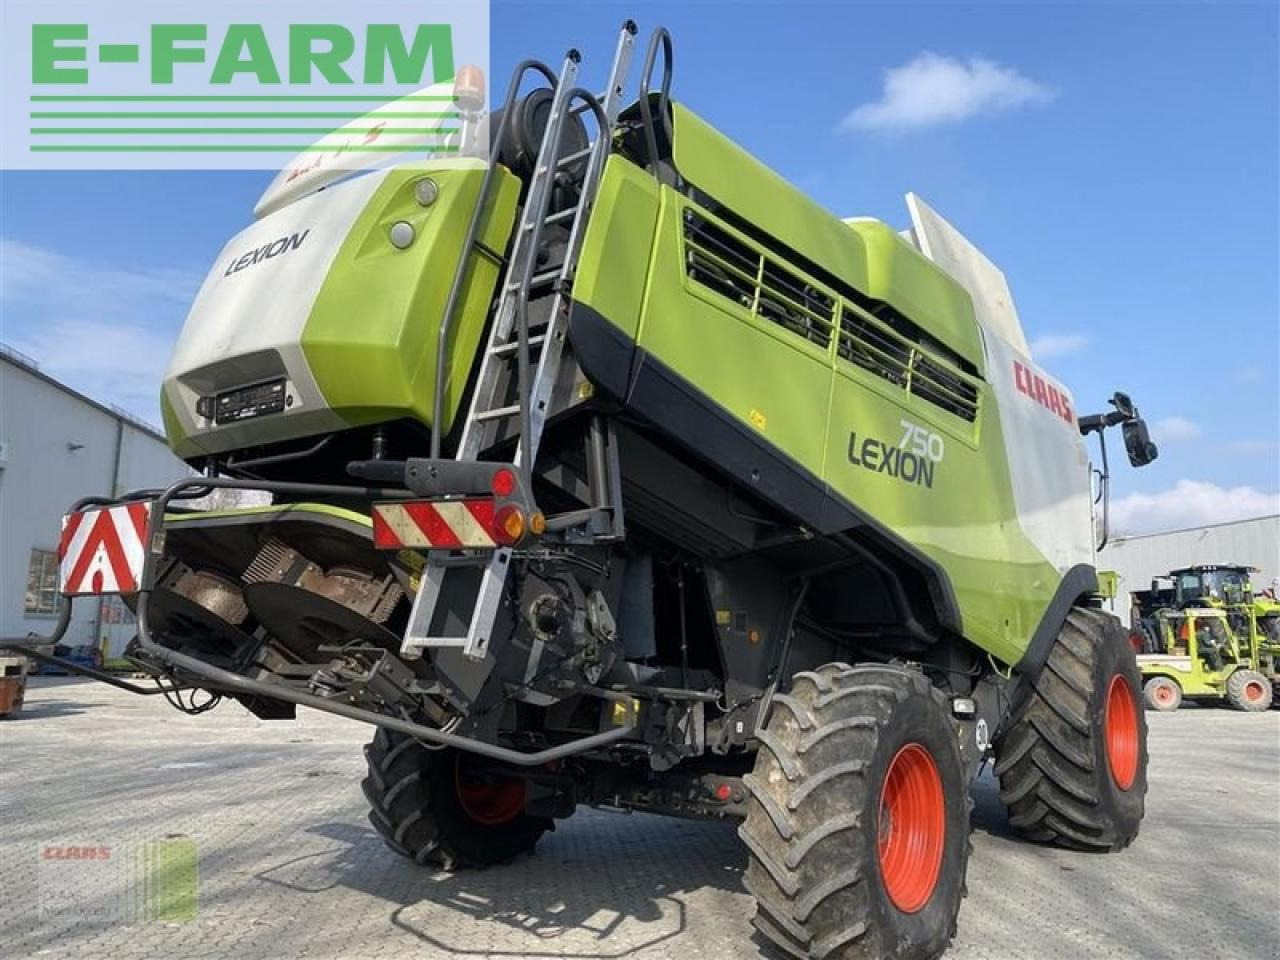 Tractor CLAAS lexion 750 v930+tw: foto 4